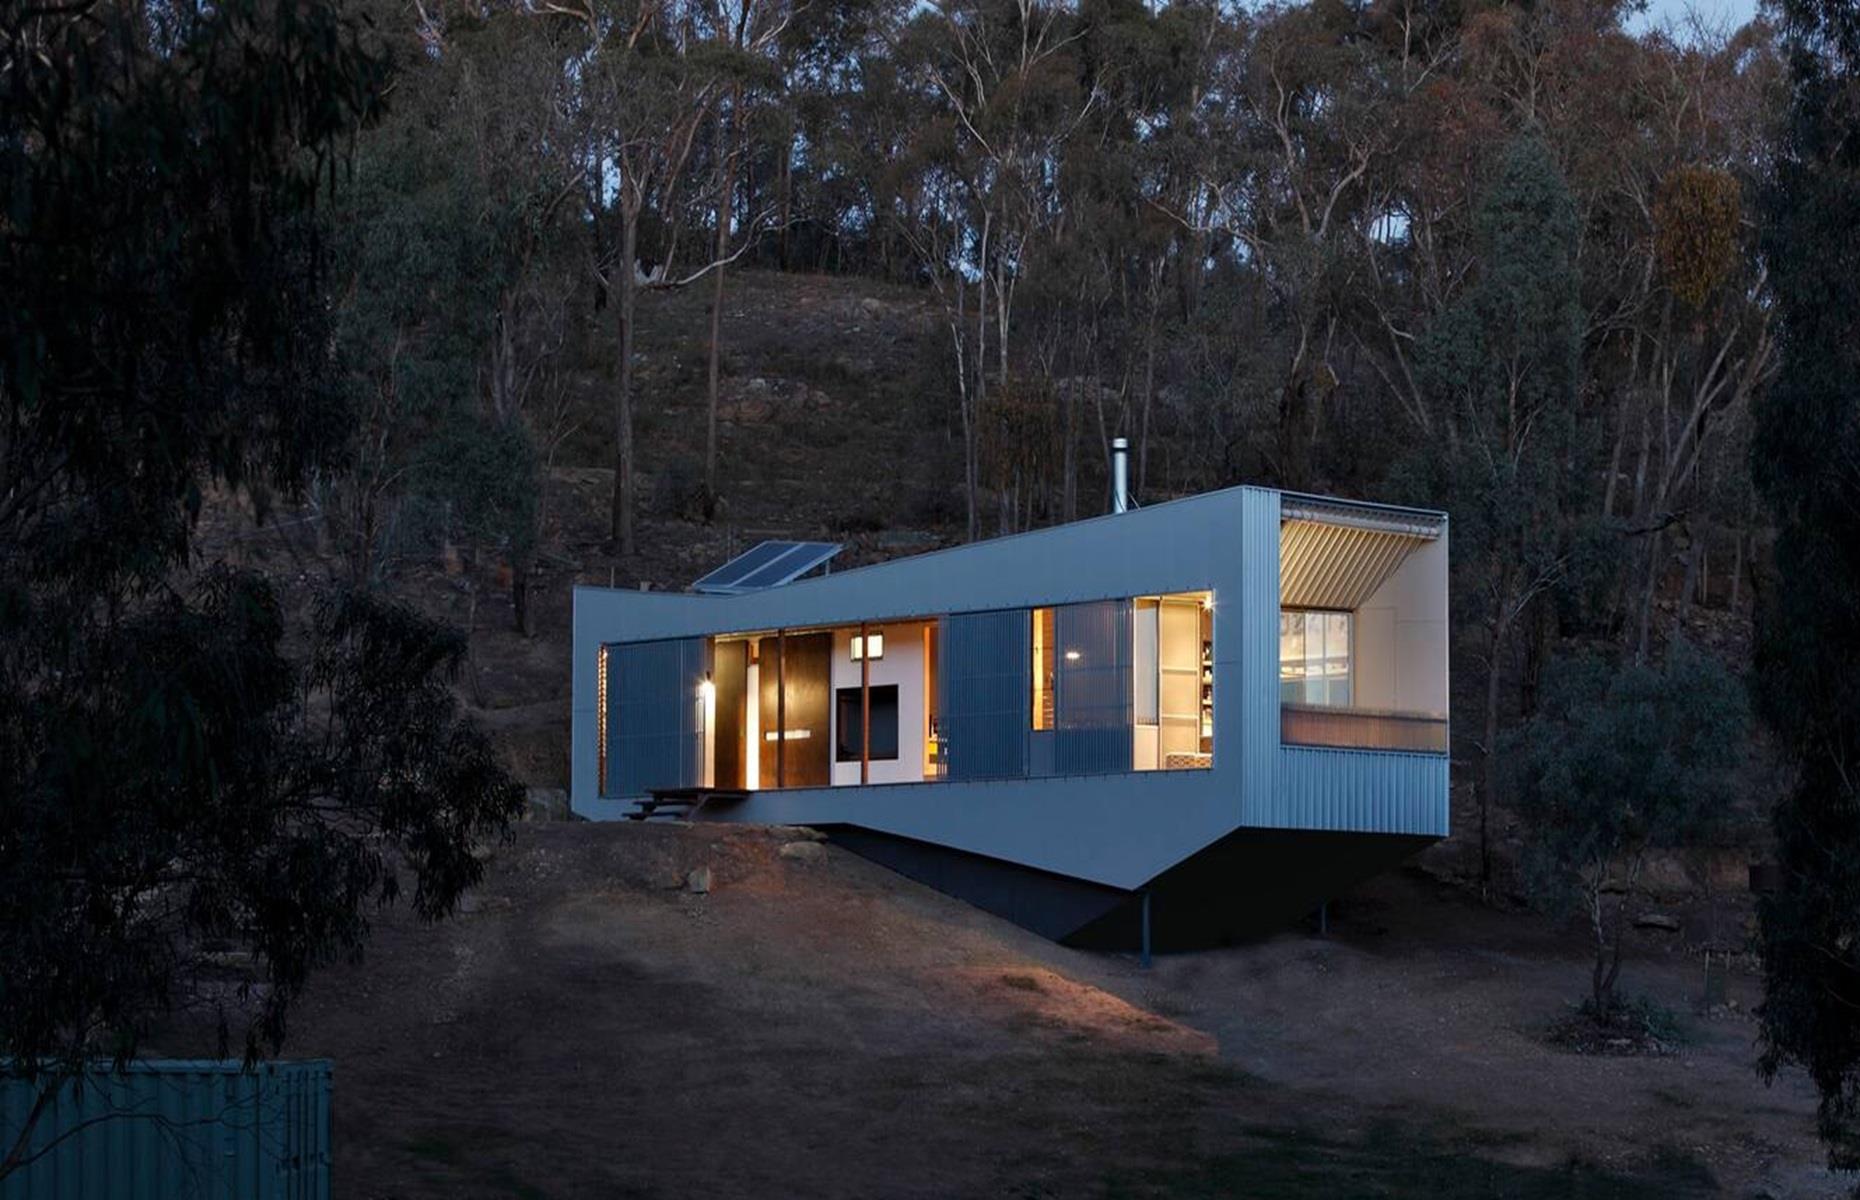 <p>Known as <a href="https://www.airbnb.com.au/rooms/5396454?source_impression_id=p3_1708427897_VVkt96eKwQvmwOwv">Riversdale Retreat</a>, this architecturally designed tiny home was a finalist in <a href="https://www.forbes.com.au/life/lifestyle/australias-best-airbnbs/">Airbnb’s 2023 Host Awards</a> – and it isn't a surprise. The home is surrounded by native bushland in the Australian town of Chewton, but it's its design and green credentials that make it truly remarkable.</p>